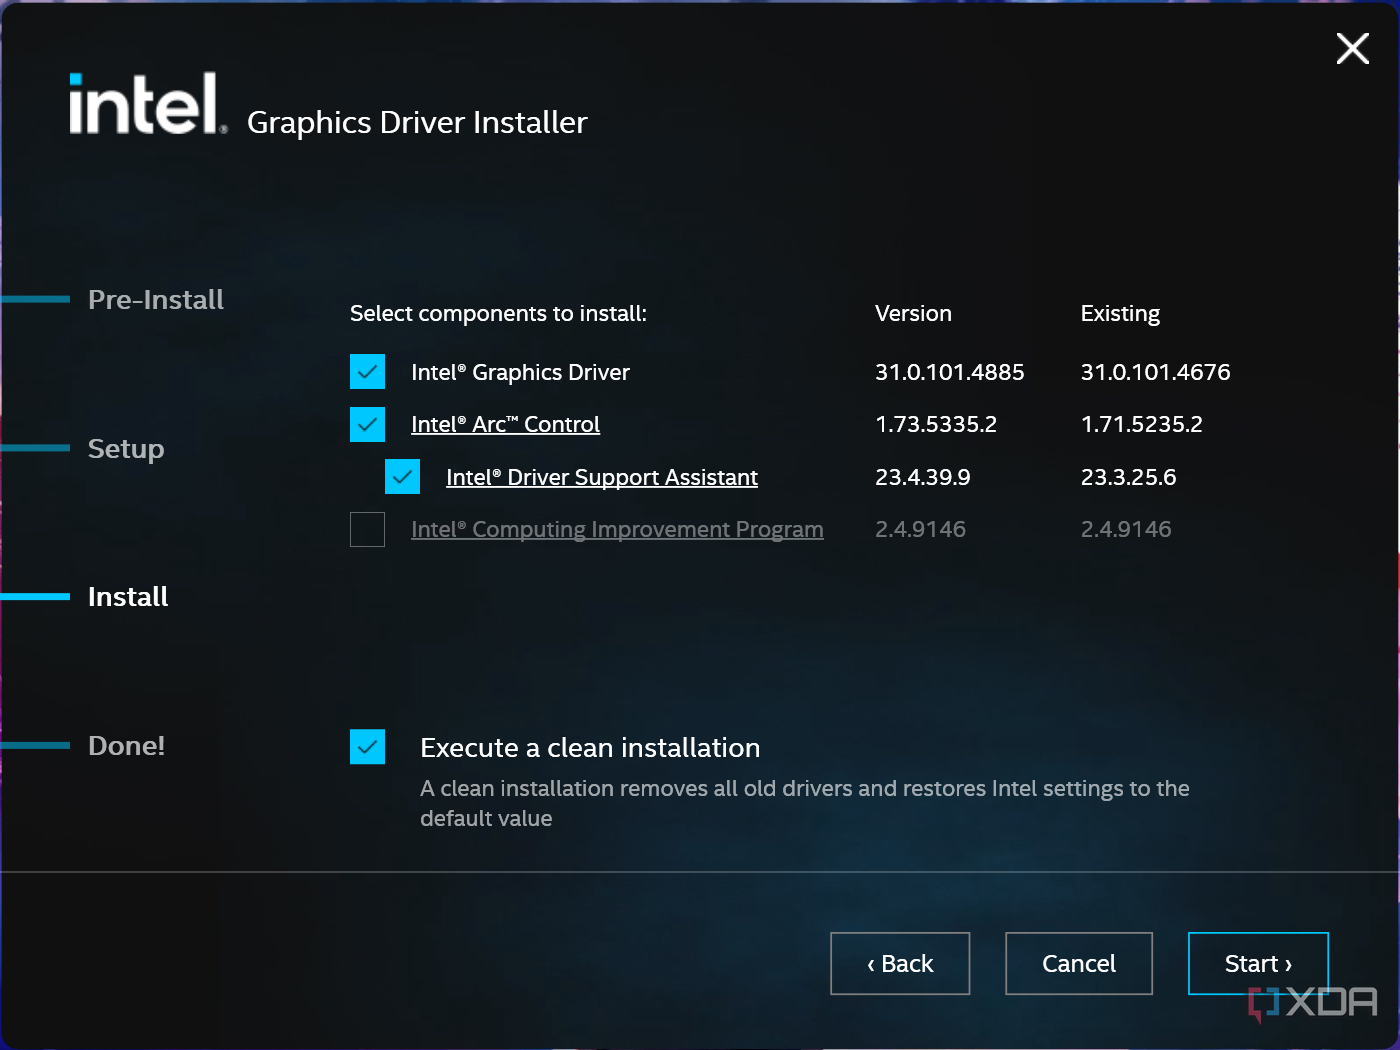 Screenshot of Intel graphics driver installer showing multiple components to be selected or deselected for the installation